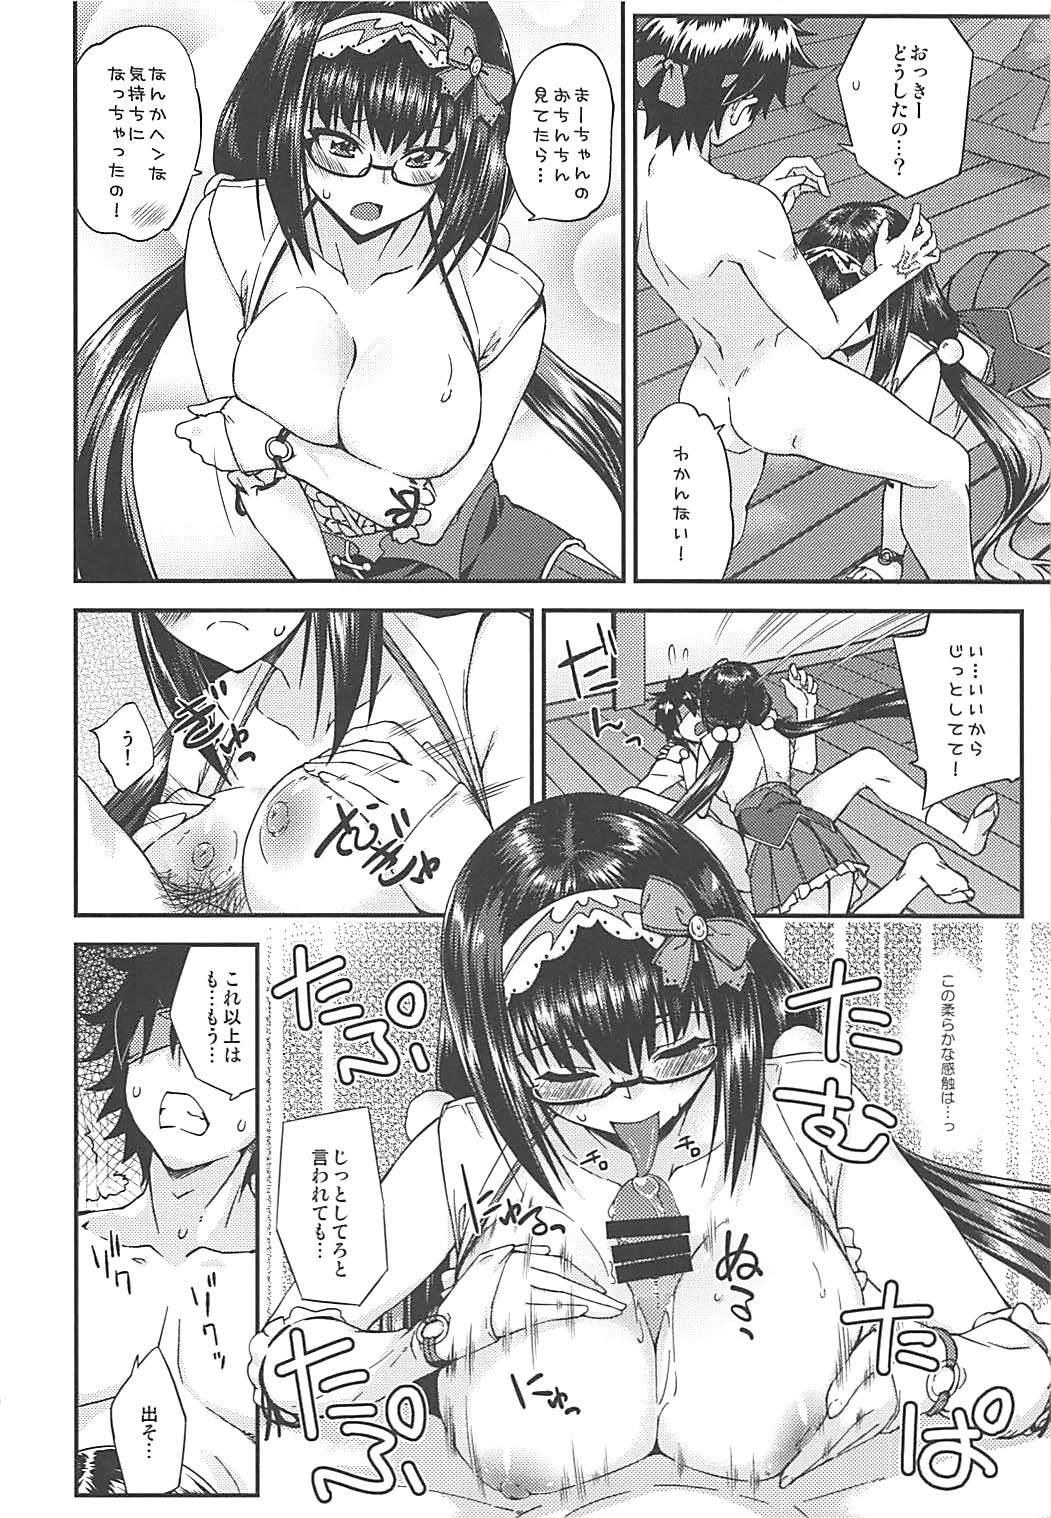 Pink Pussy Osakabehime no Iutoori - Fate grand order Curious - Page 9